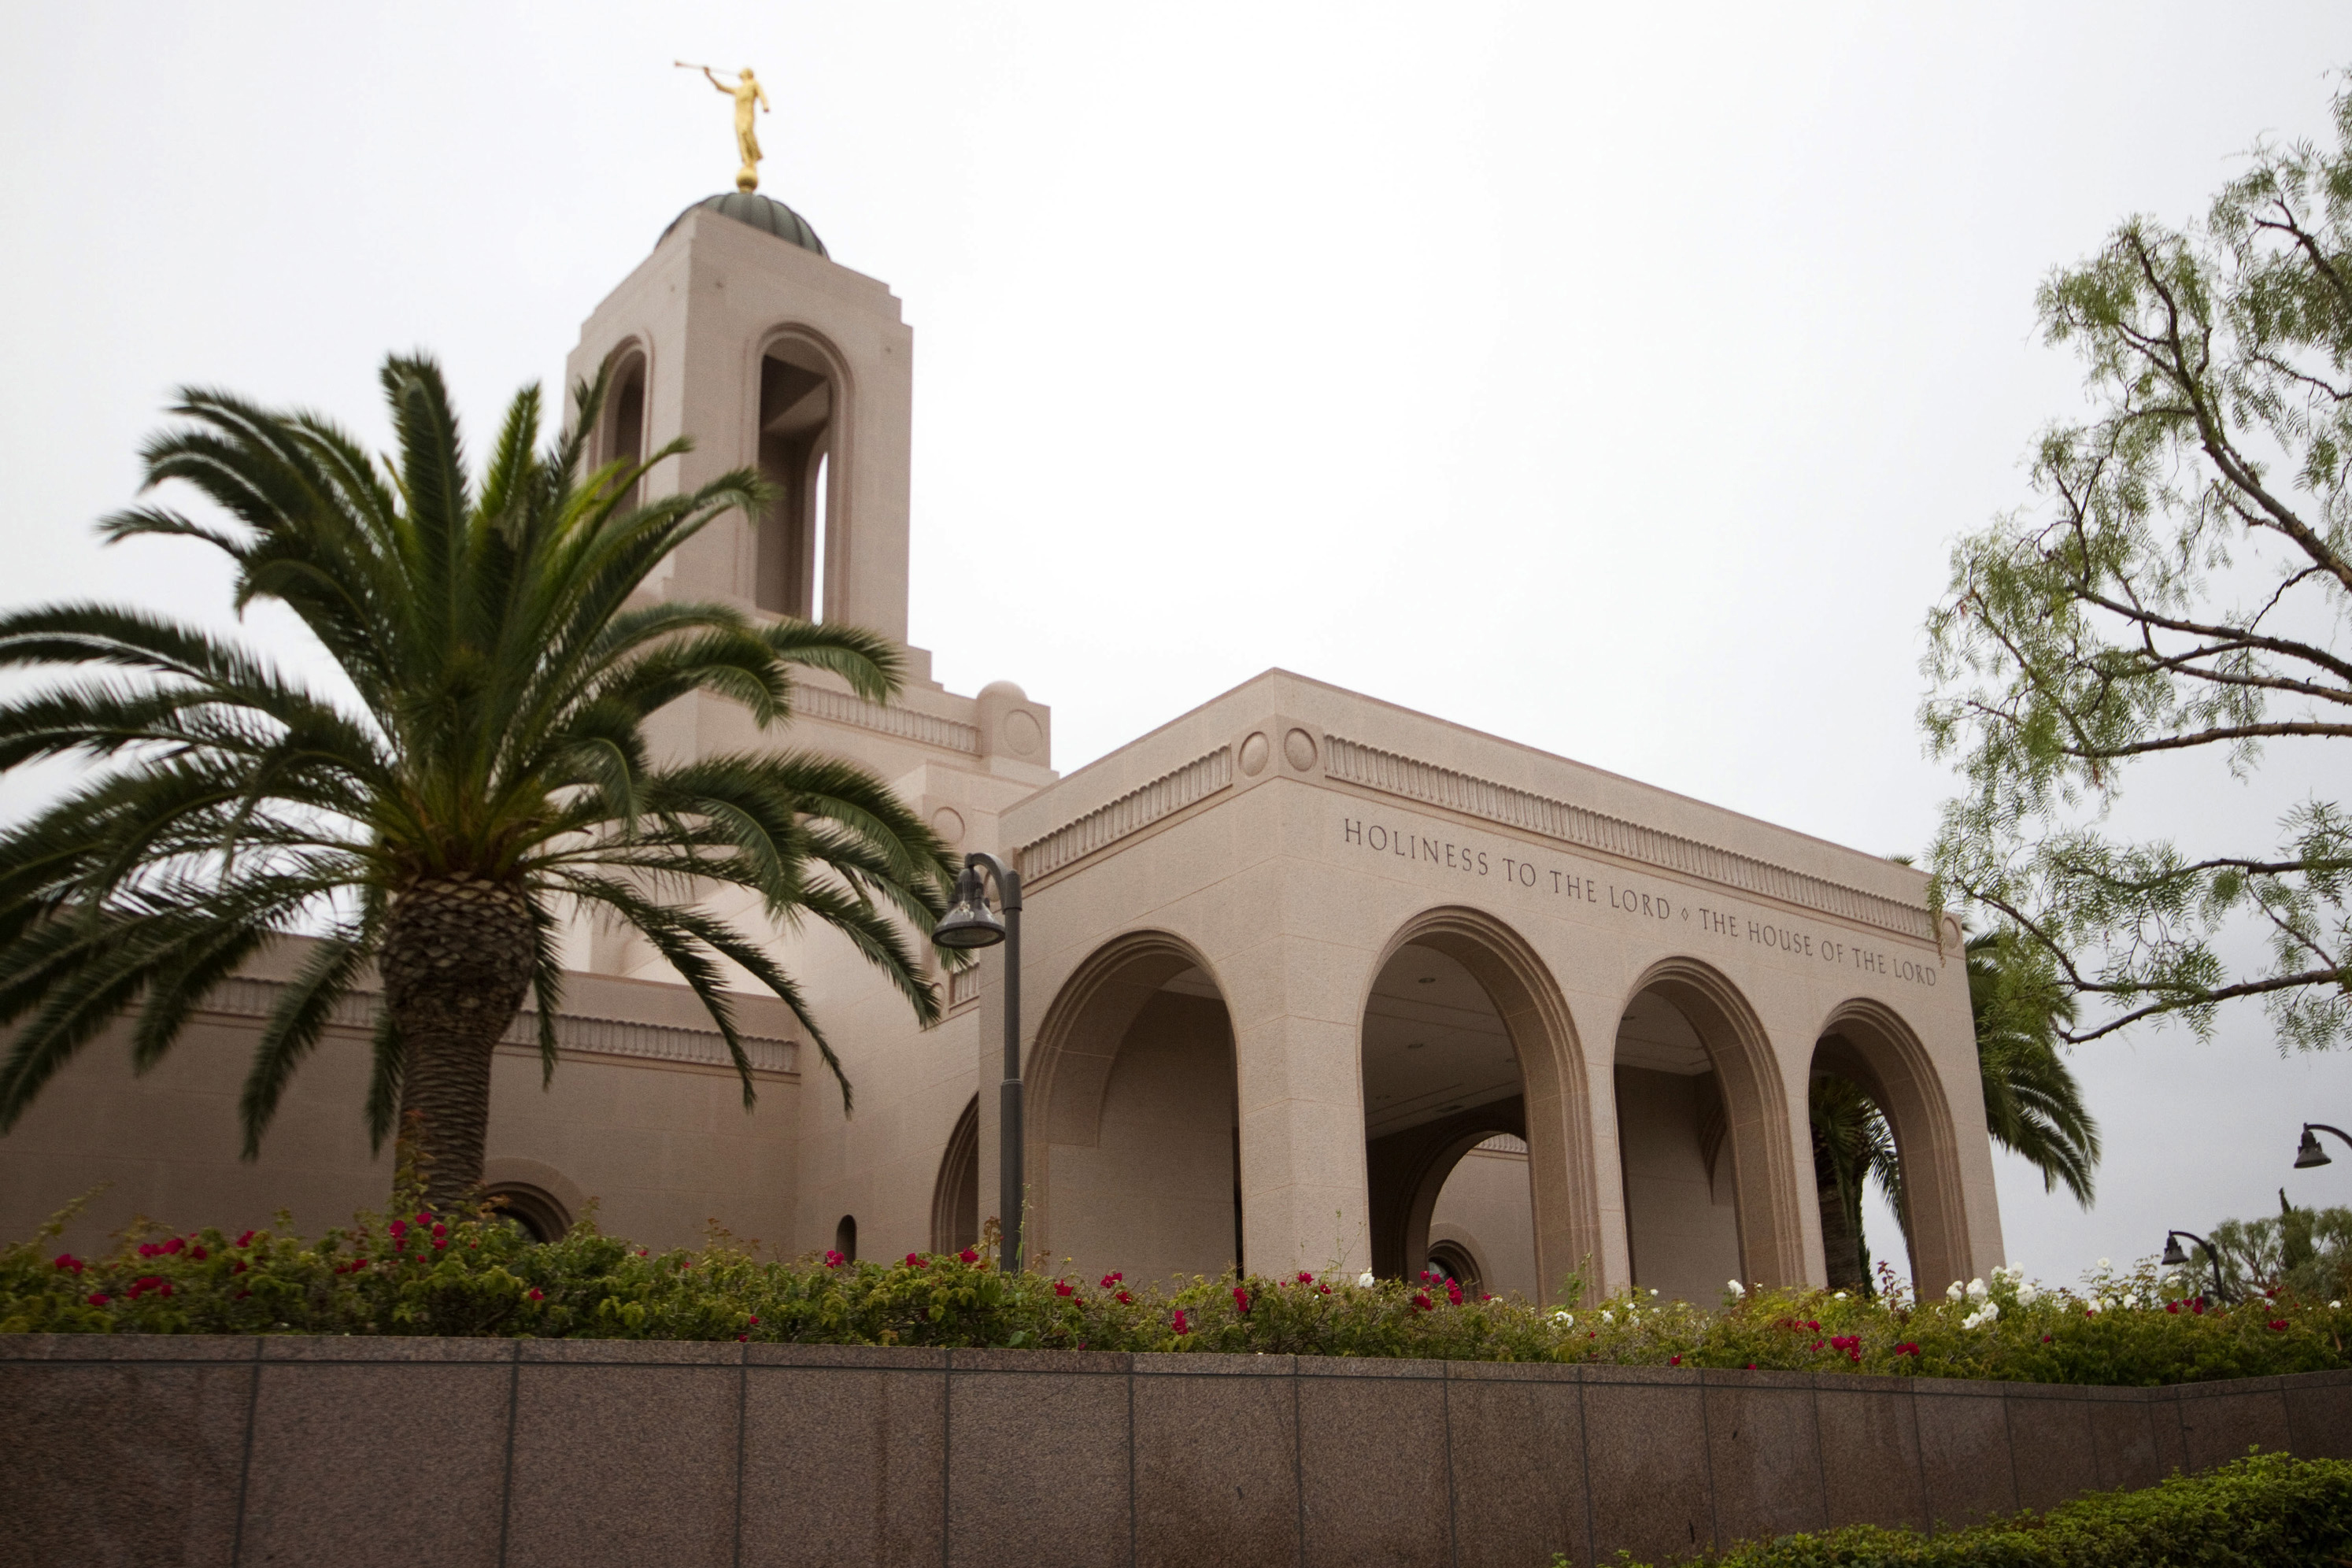 The entrance to the Newport Beach California Temple, with a nearby palm tree and the words “Holiness to the Lord: The House of the Lord” engraved over the door.